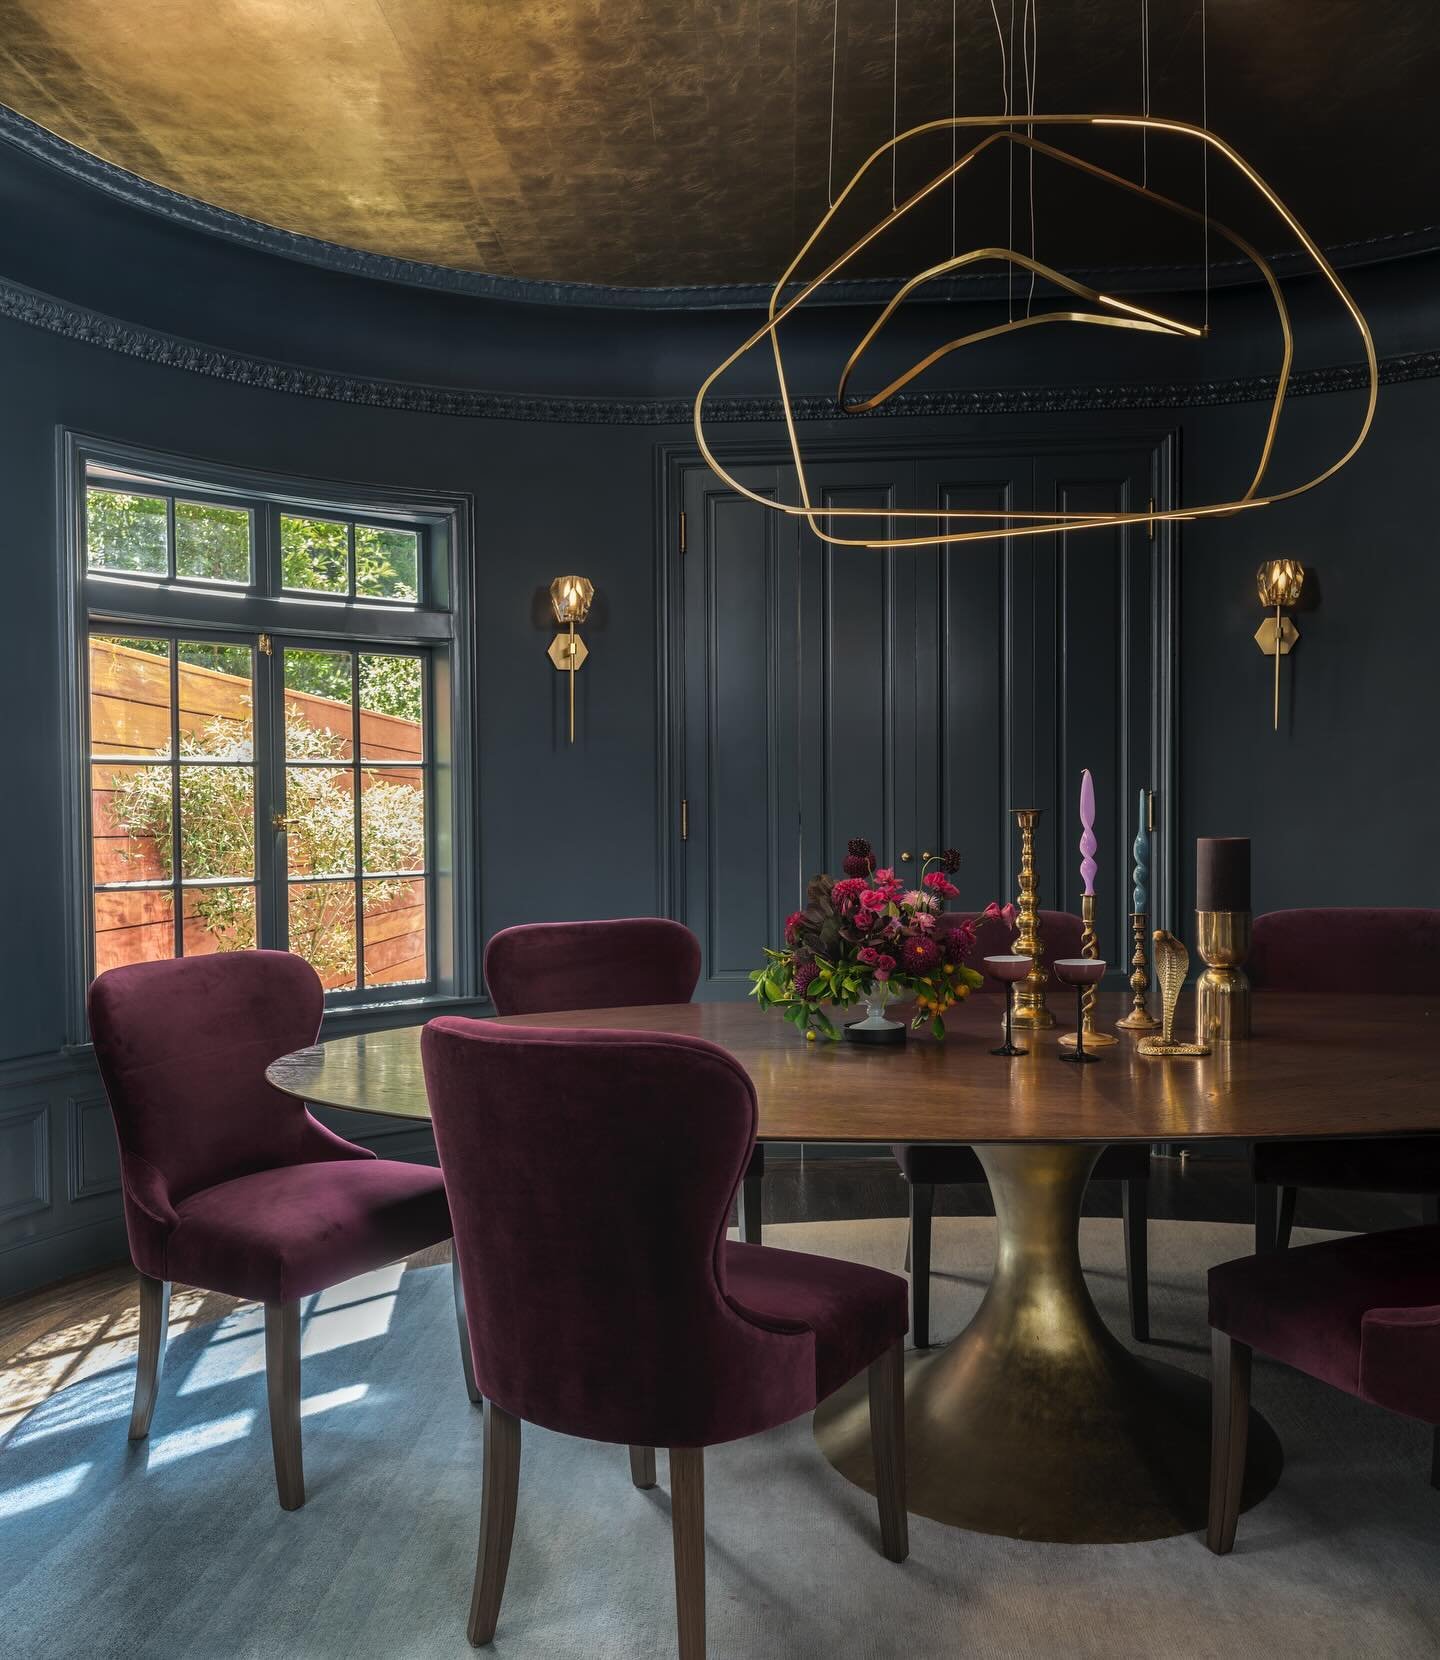 Feeling dramatic today on this full moon? Our dining room from the #Beauxarts Reno in Presidio Heights, feels fitting ! #SanFrancisco. @farrowandball @1stdibs  Styling: @elenashawnprojects &yen; @fashawn1 📸 @christopherstark @blacklabelhome @julianc